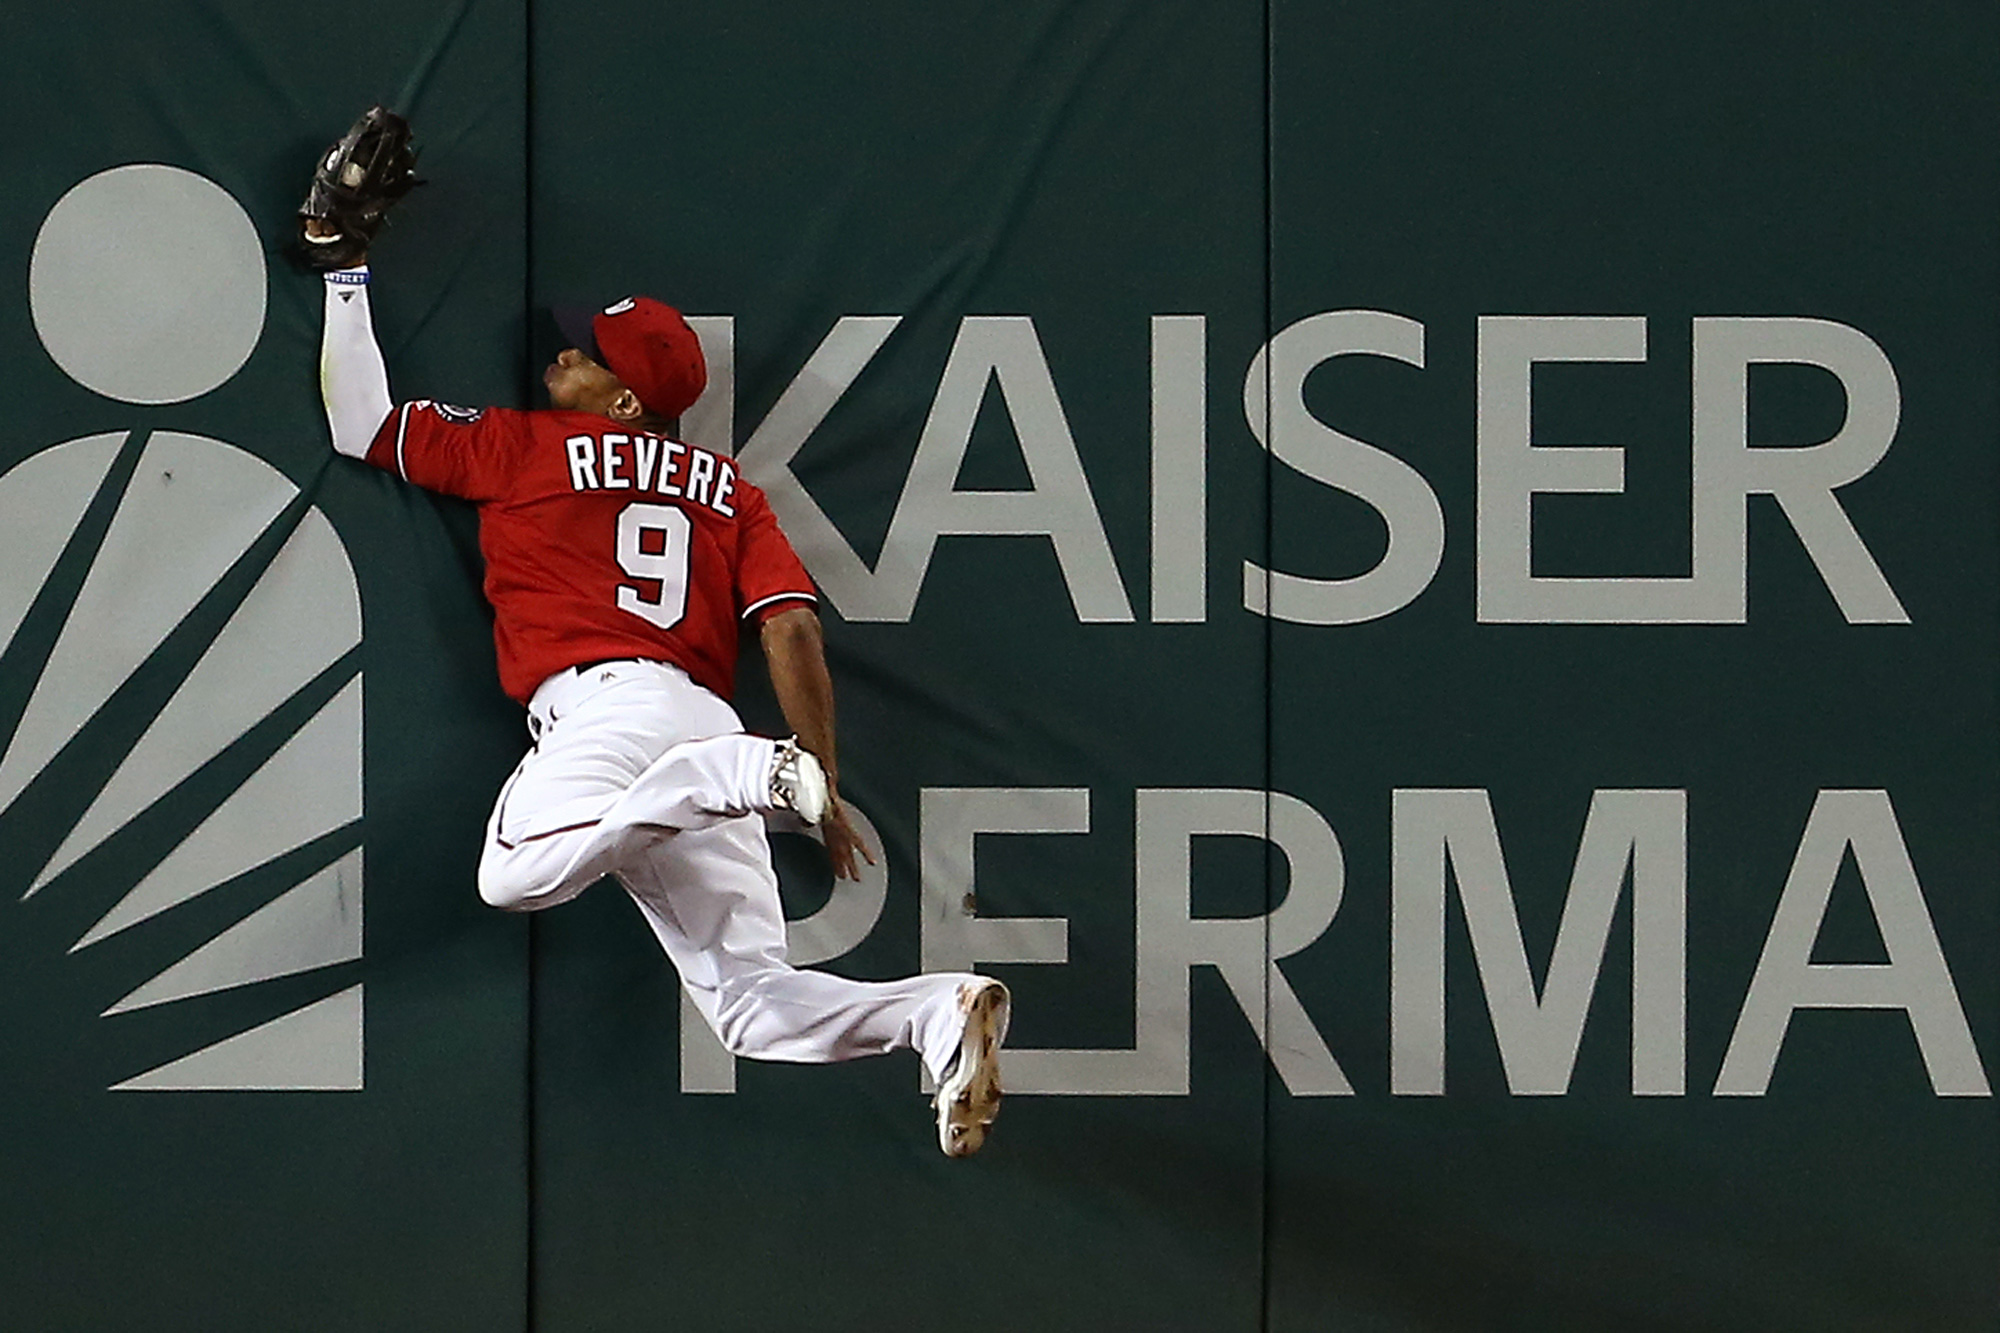  Ben Revere #9 of the Washington Nationals makes a catch for the third out of the sixth inning against the Cincinnati Reds at Nationals Park on July 2, 2016 in Washington, DC. 